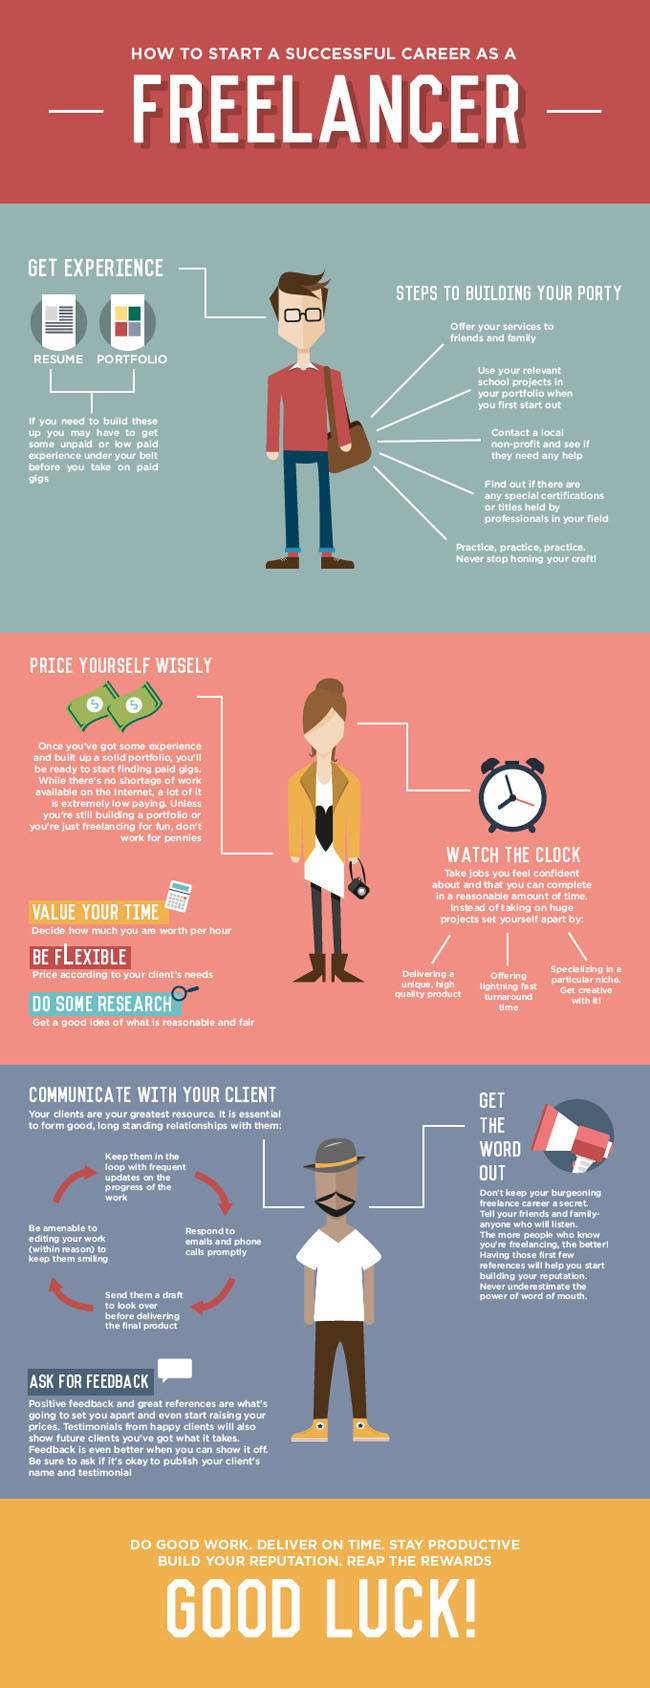 Infographic design idea #208: Starting Your Successful Career as a Freelancer [Infographic]